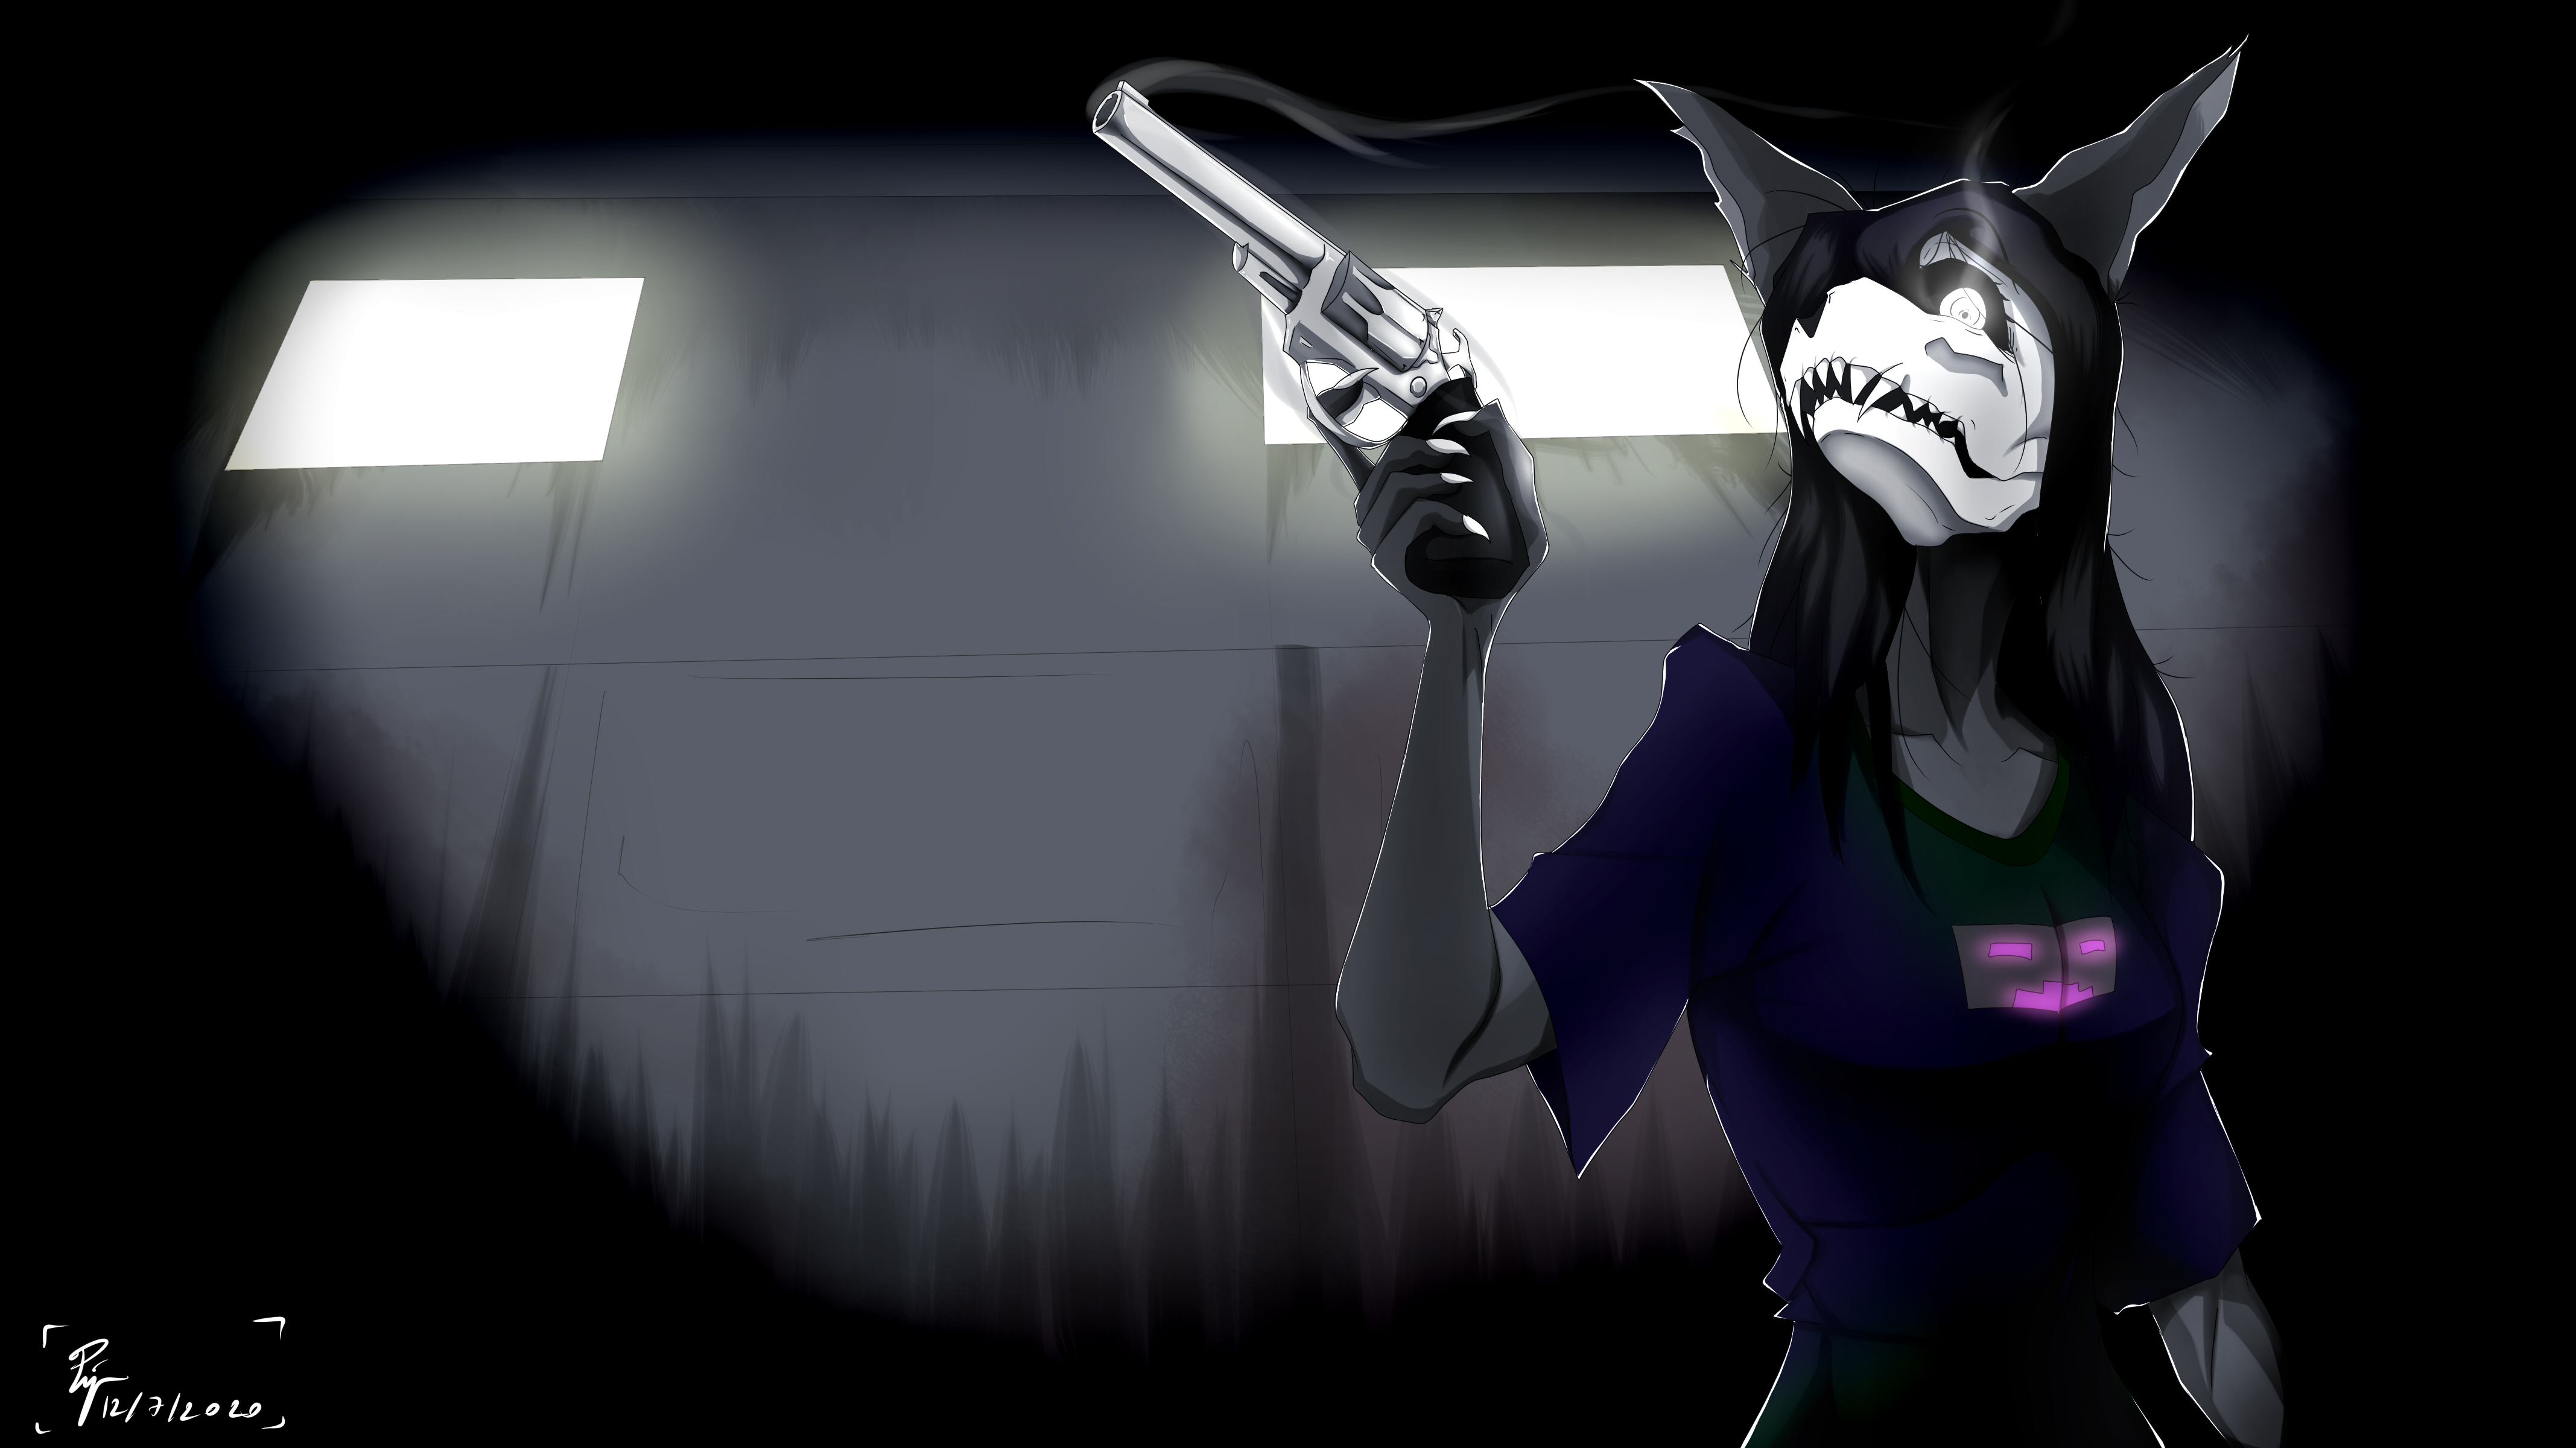 Hey there! (SCP 1471) by SilverlingArt on DeviantArt